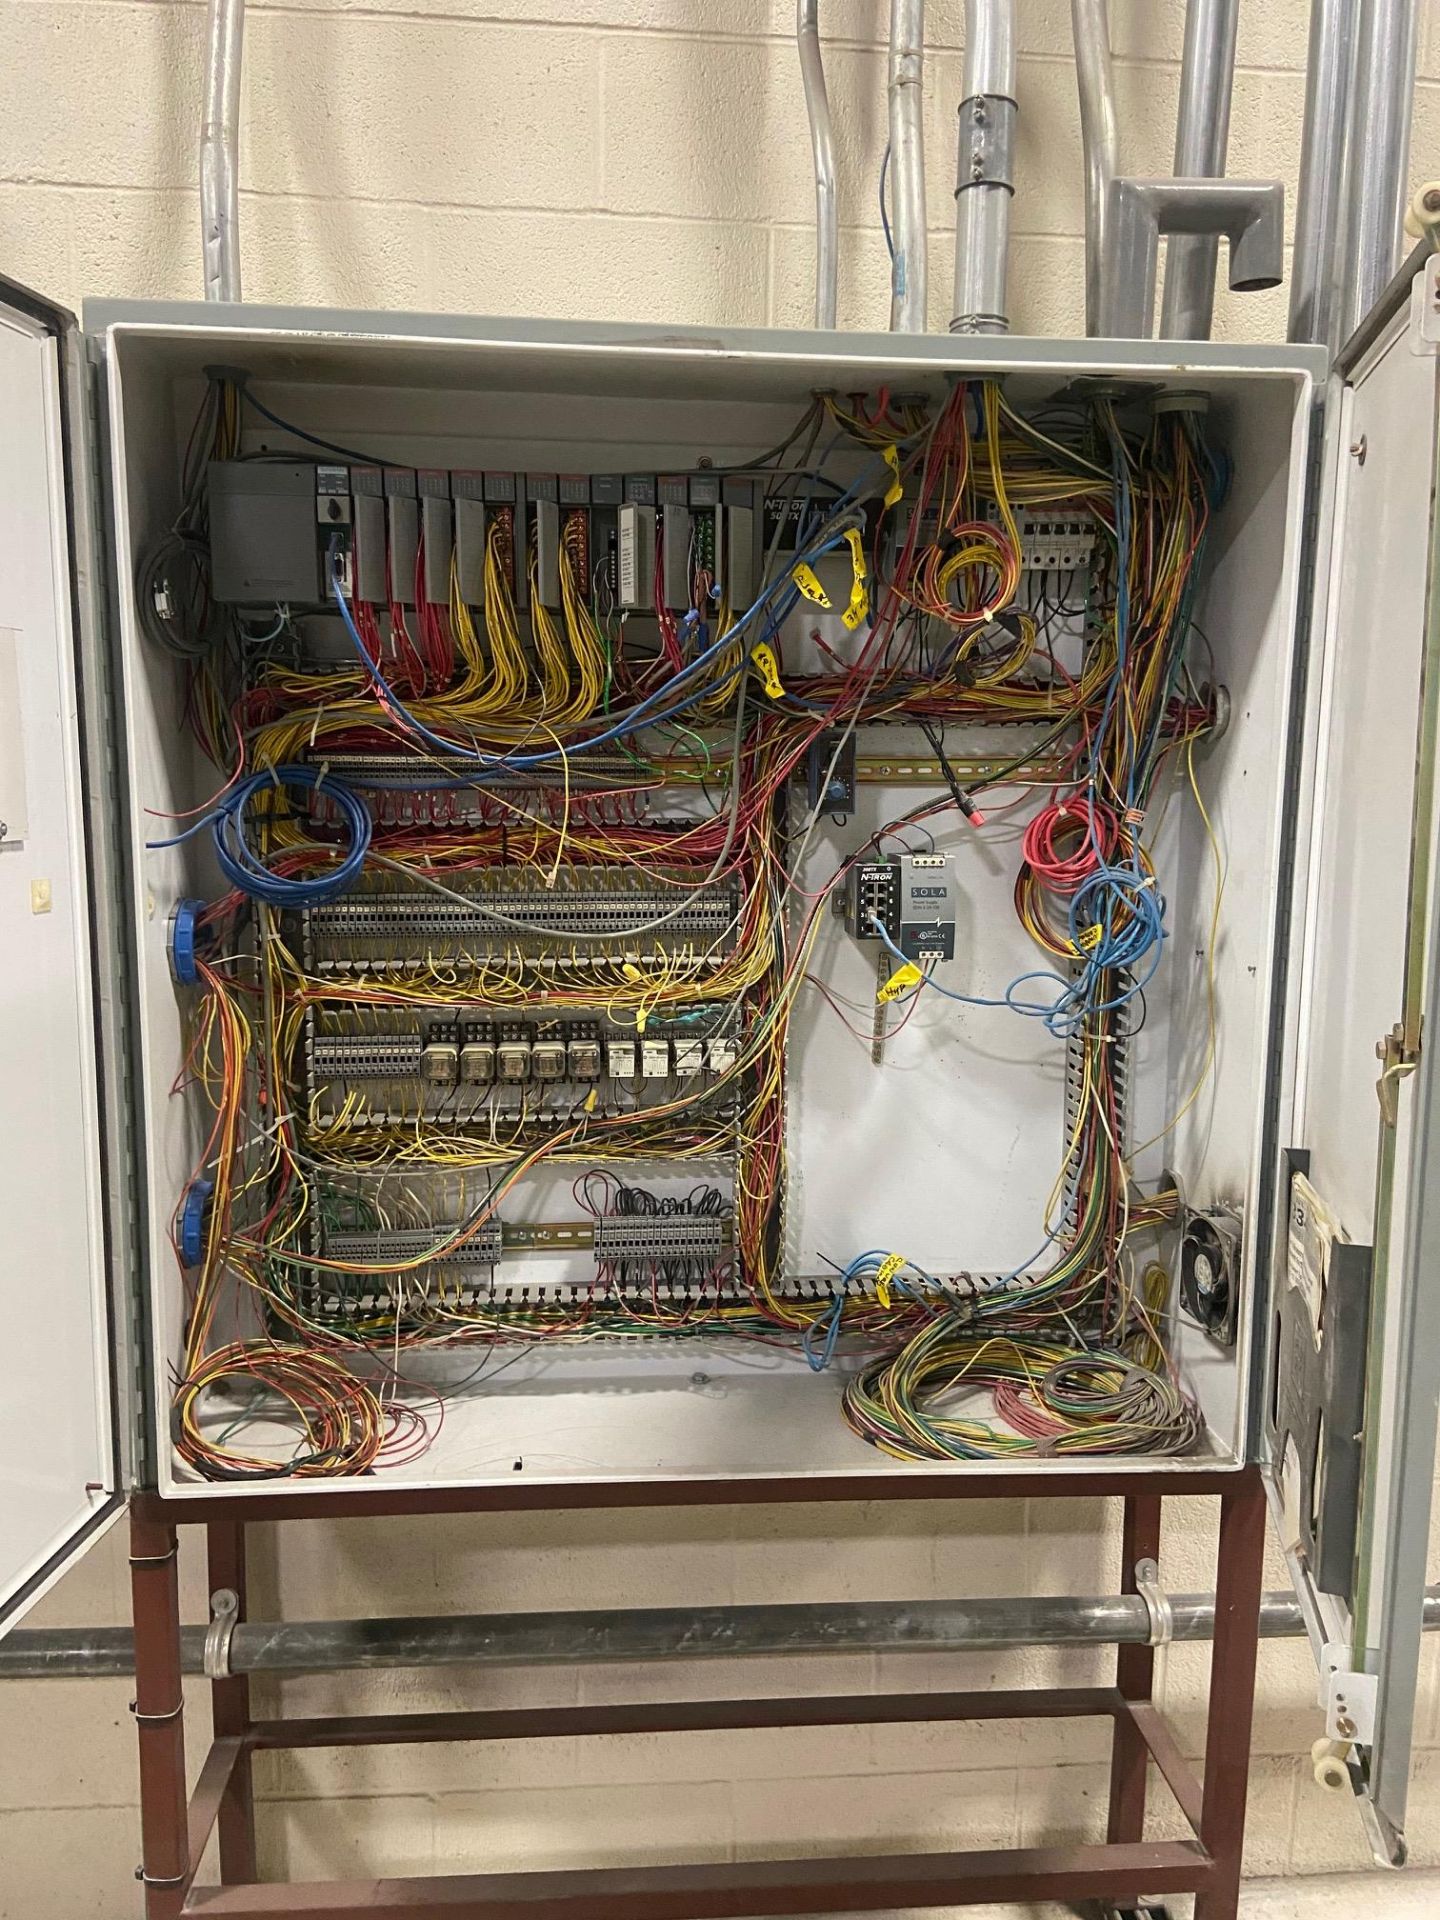 Electrical Panel and Contents - Image 2 of 2